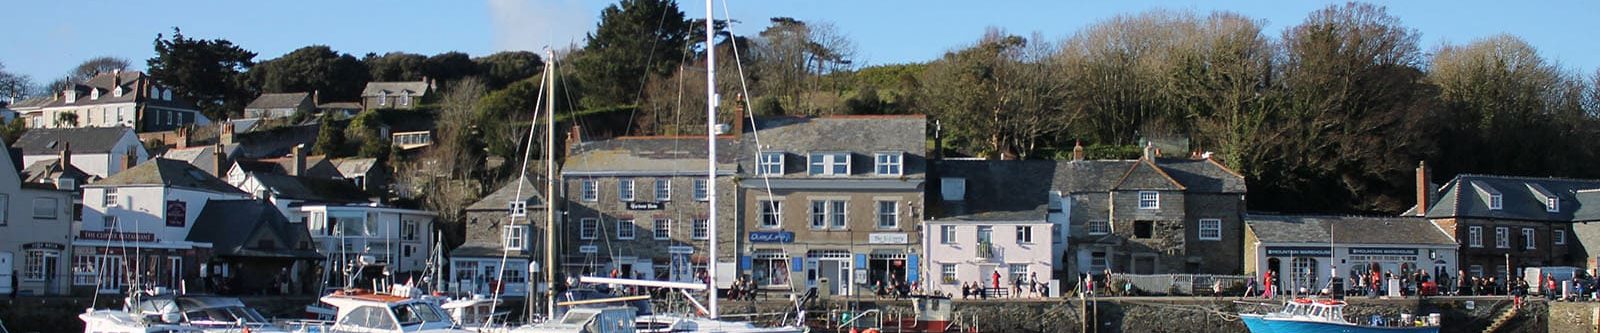 Padstow in winter